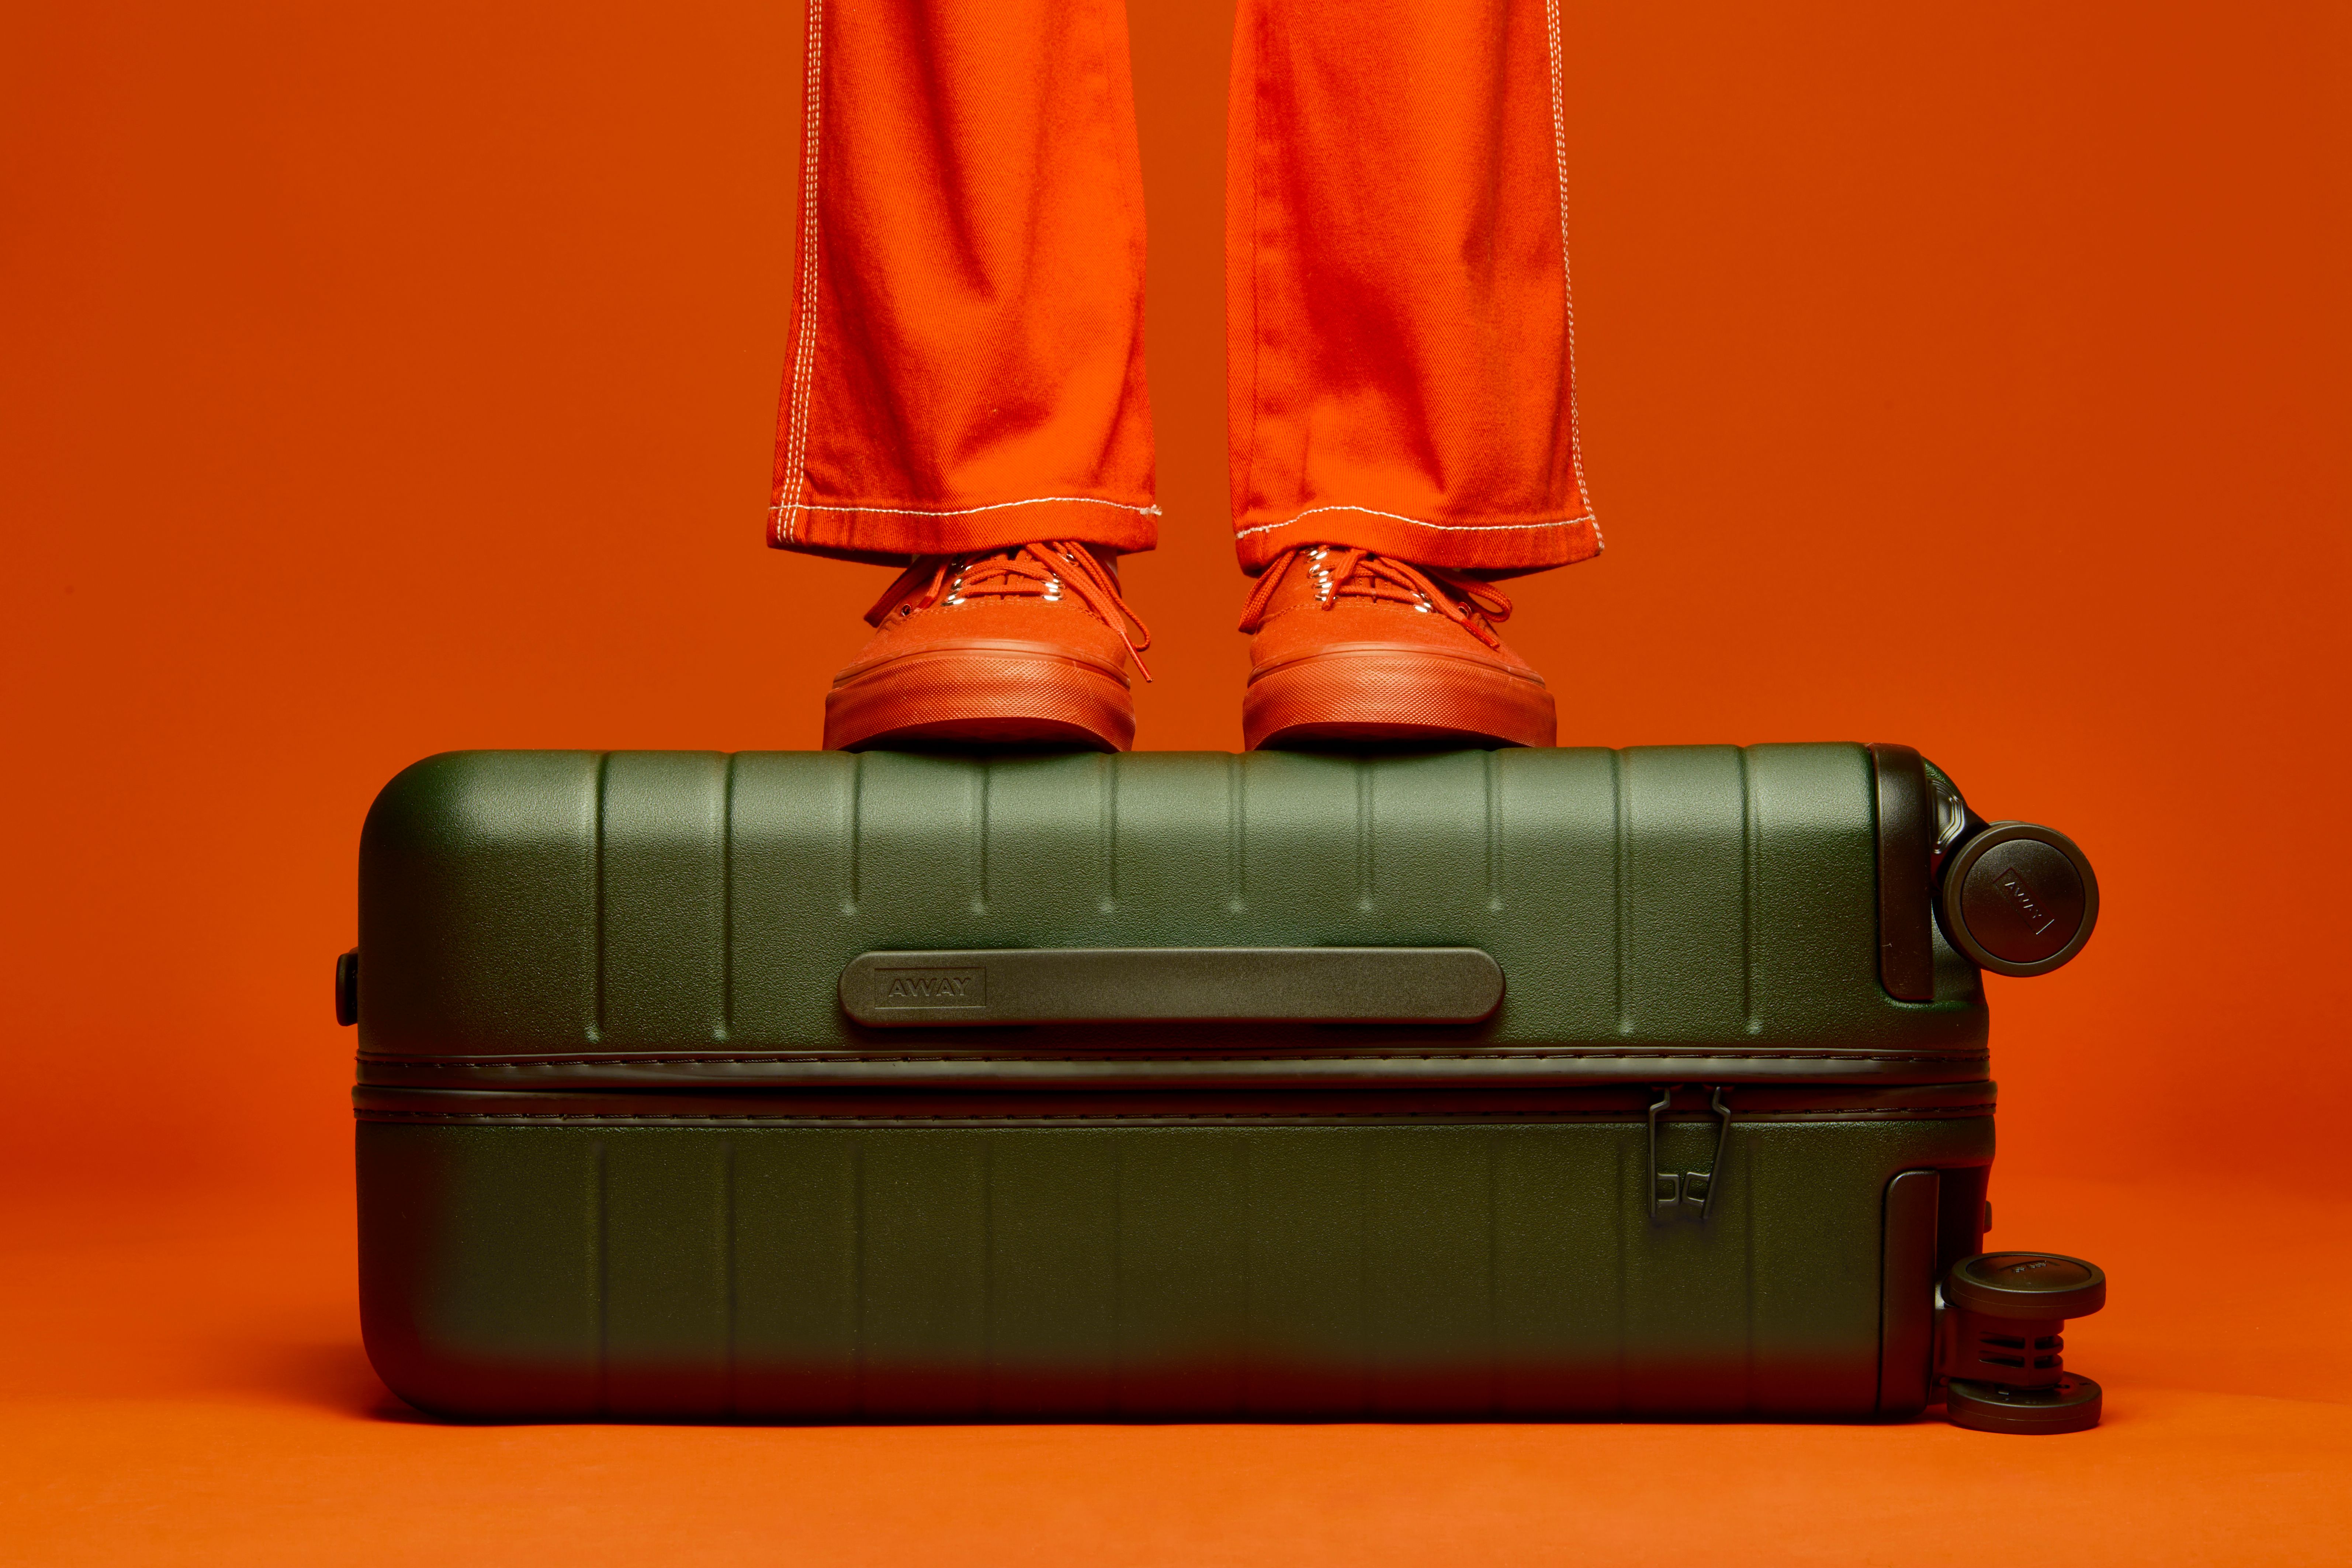 9 Best Hard-Shell Suitcases That Are Totally Worth It